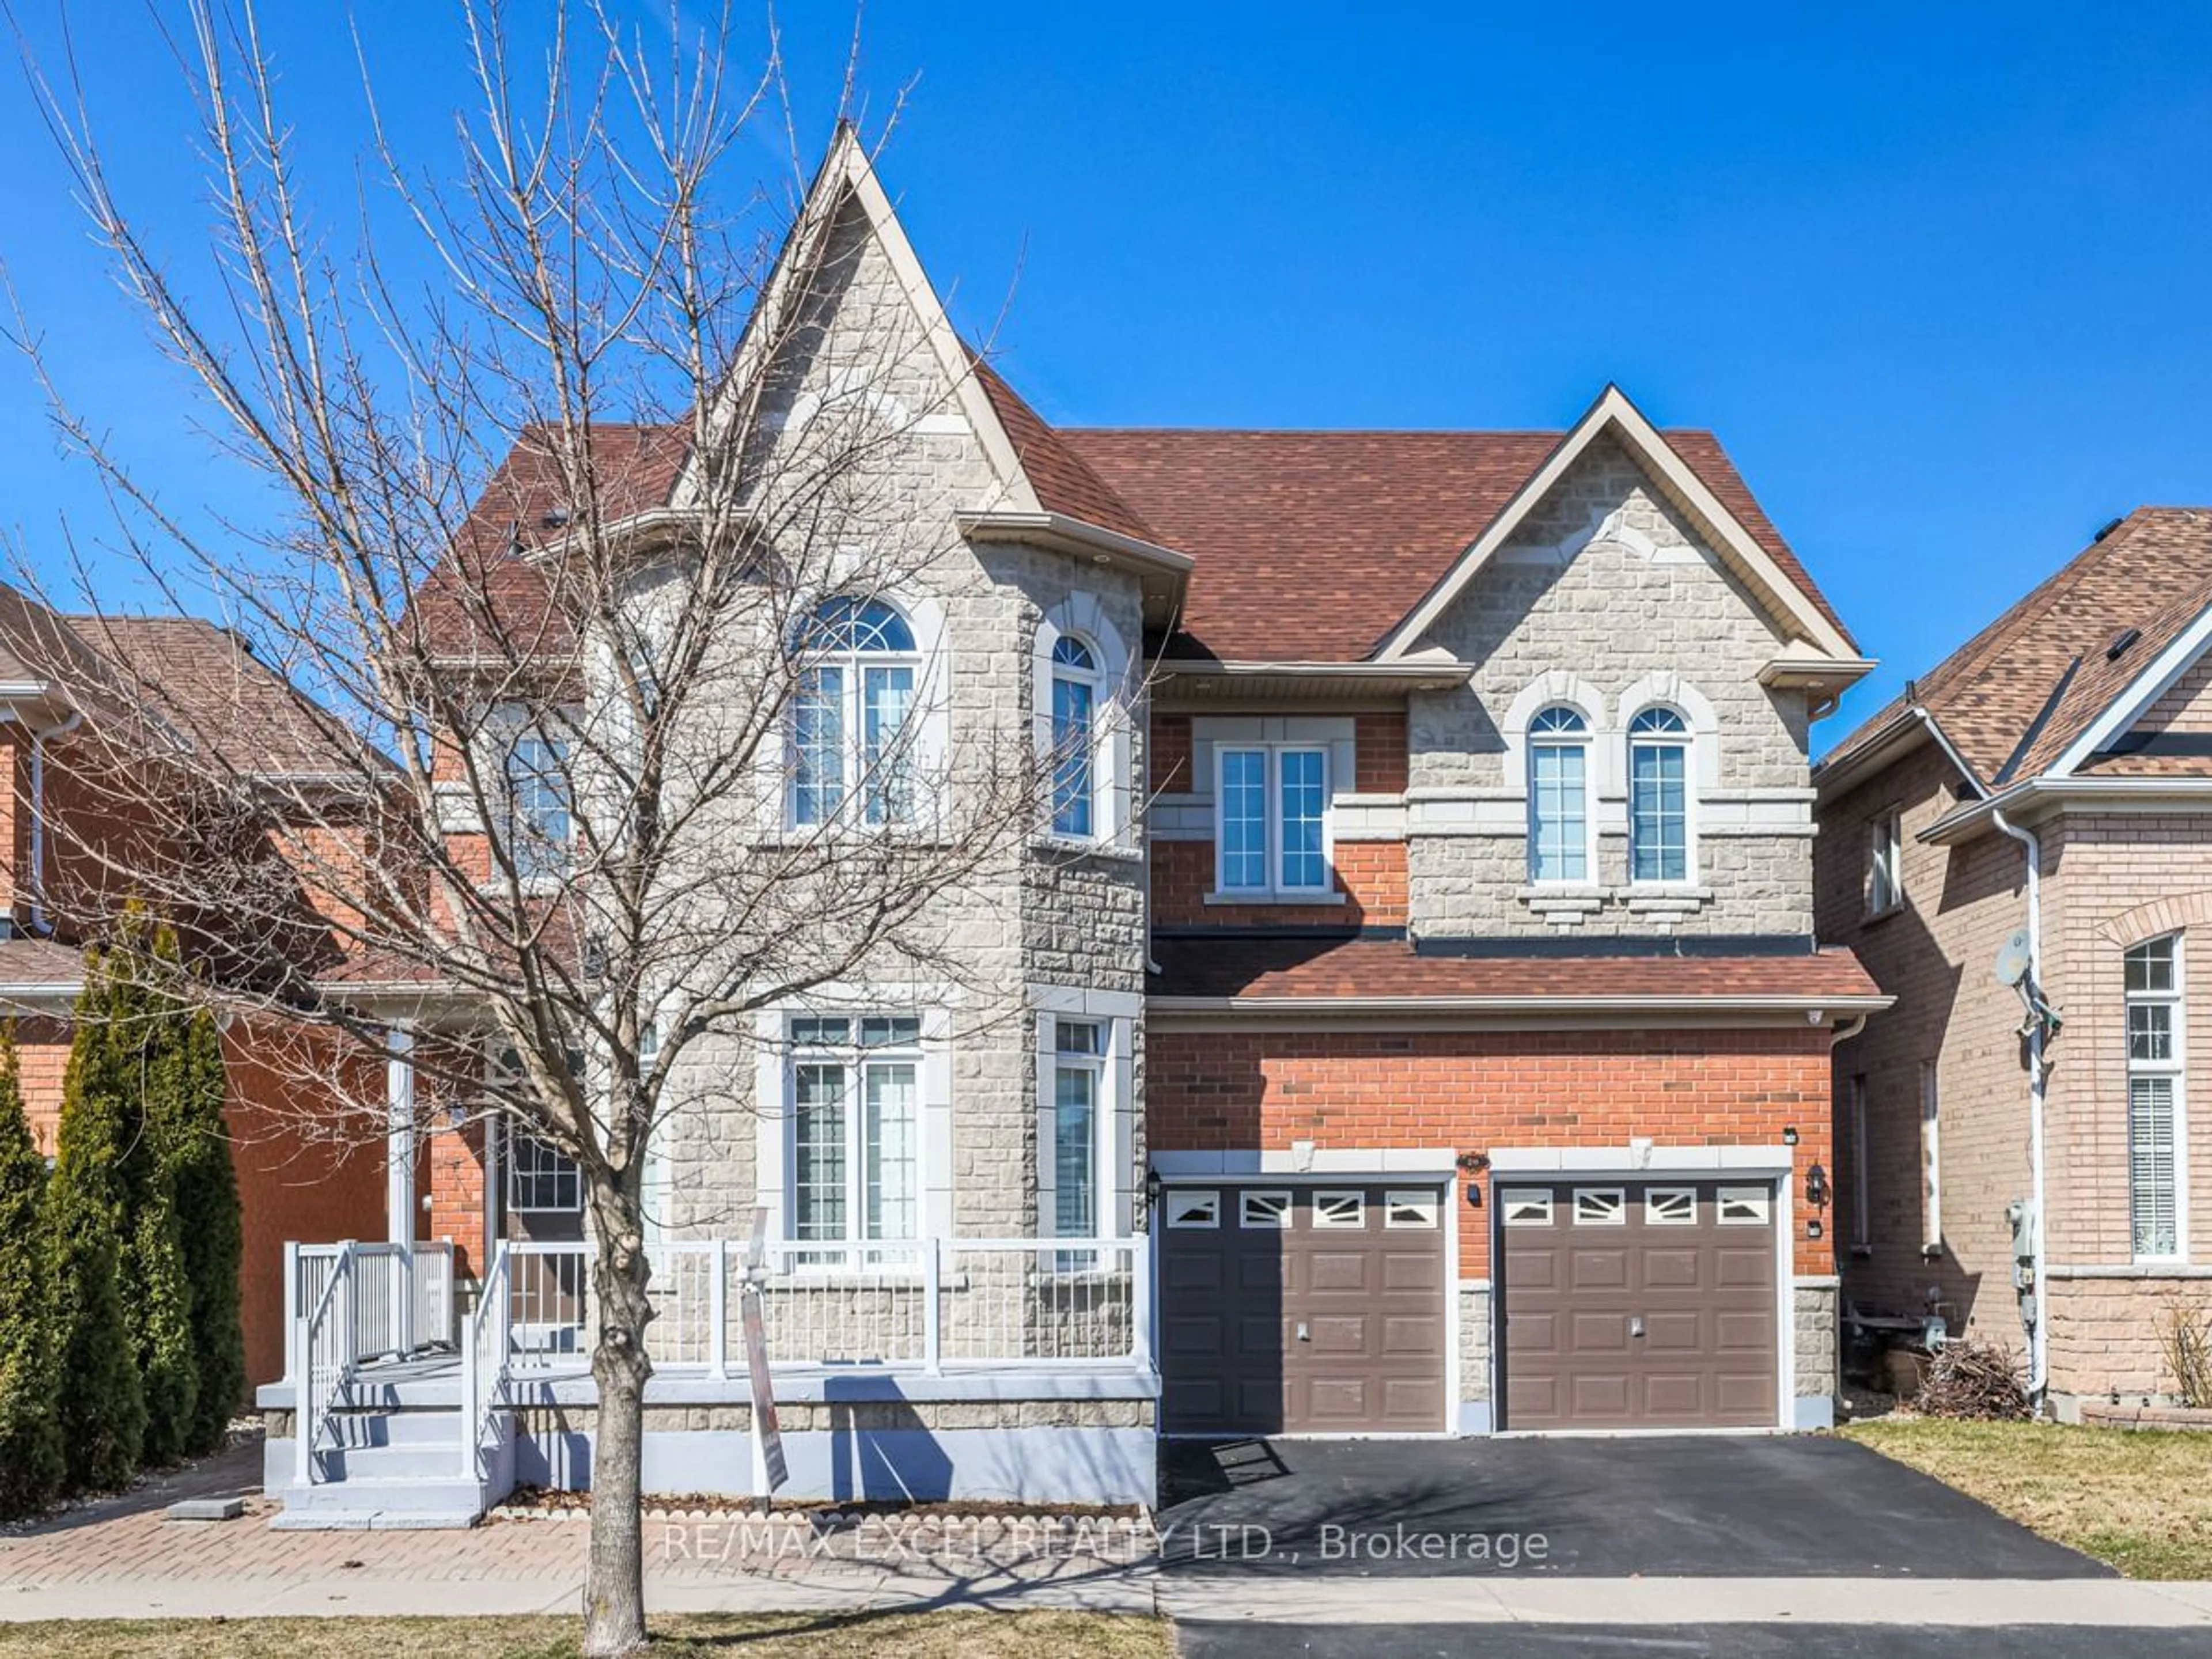 Home with brick exterior material for 20 Ralph Chalmers Ave, Markham Ontario L6E 2C4